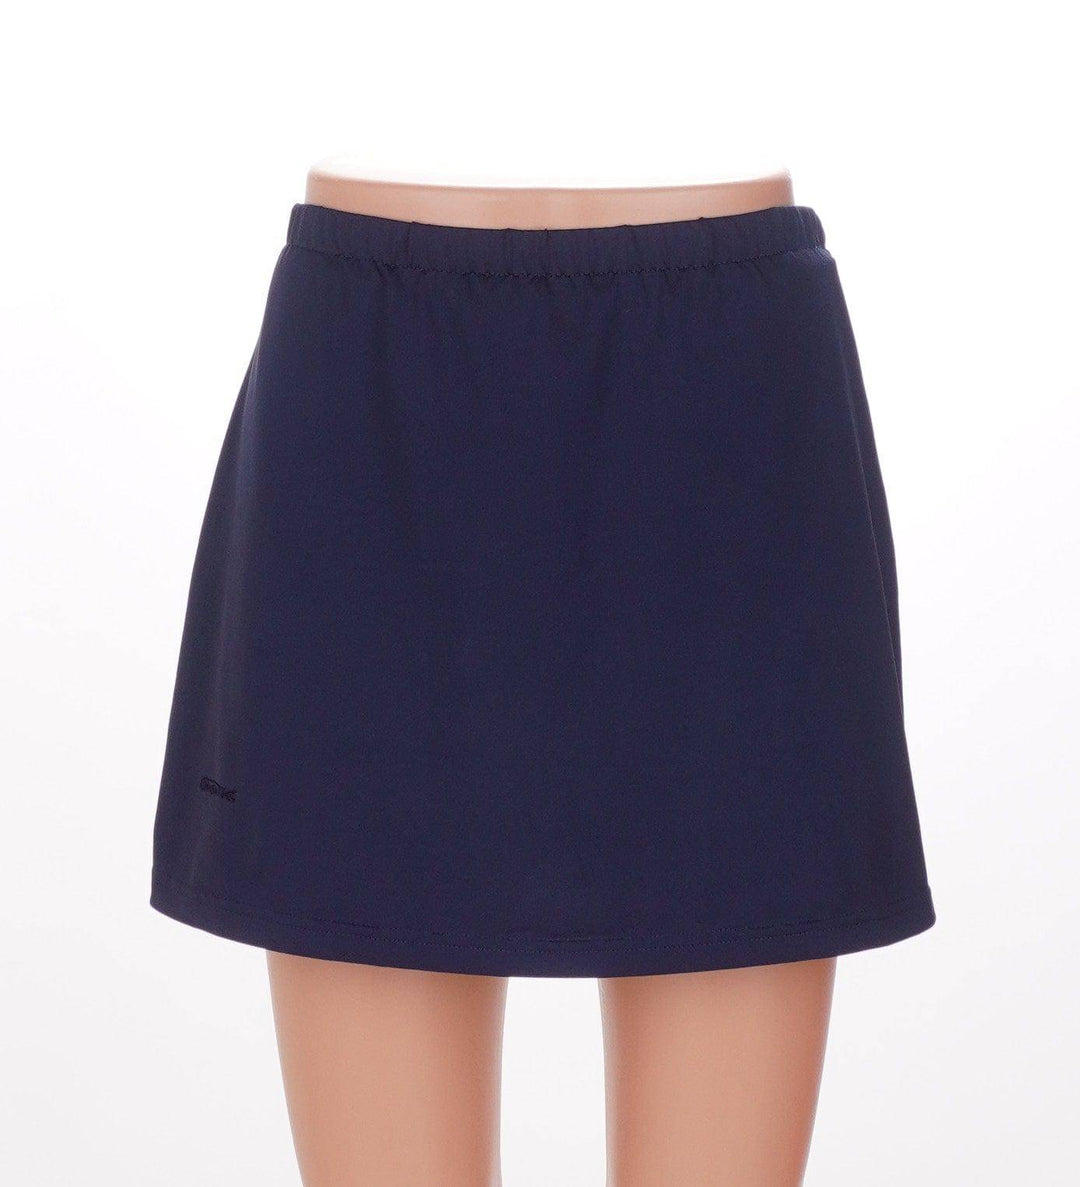 Bolle Navy / Small / Consigned Bolle 14" Tennis Skort - Navy - Size Small